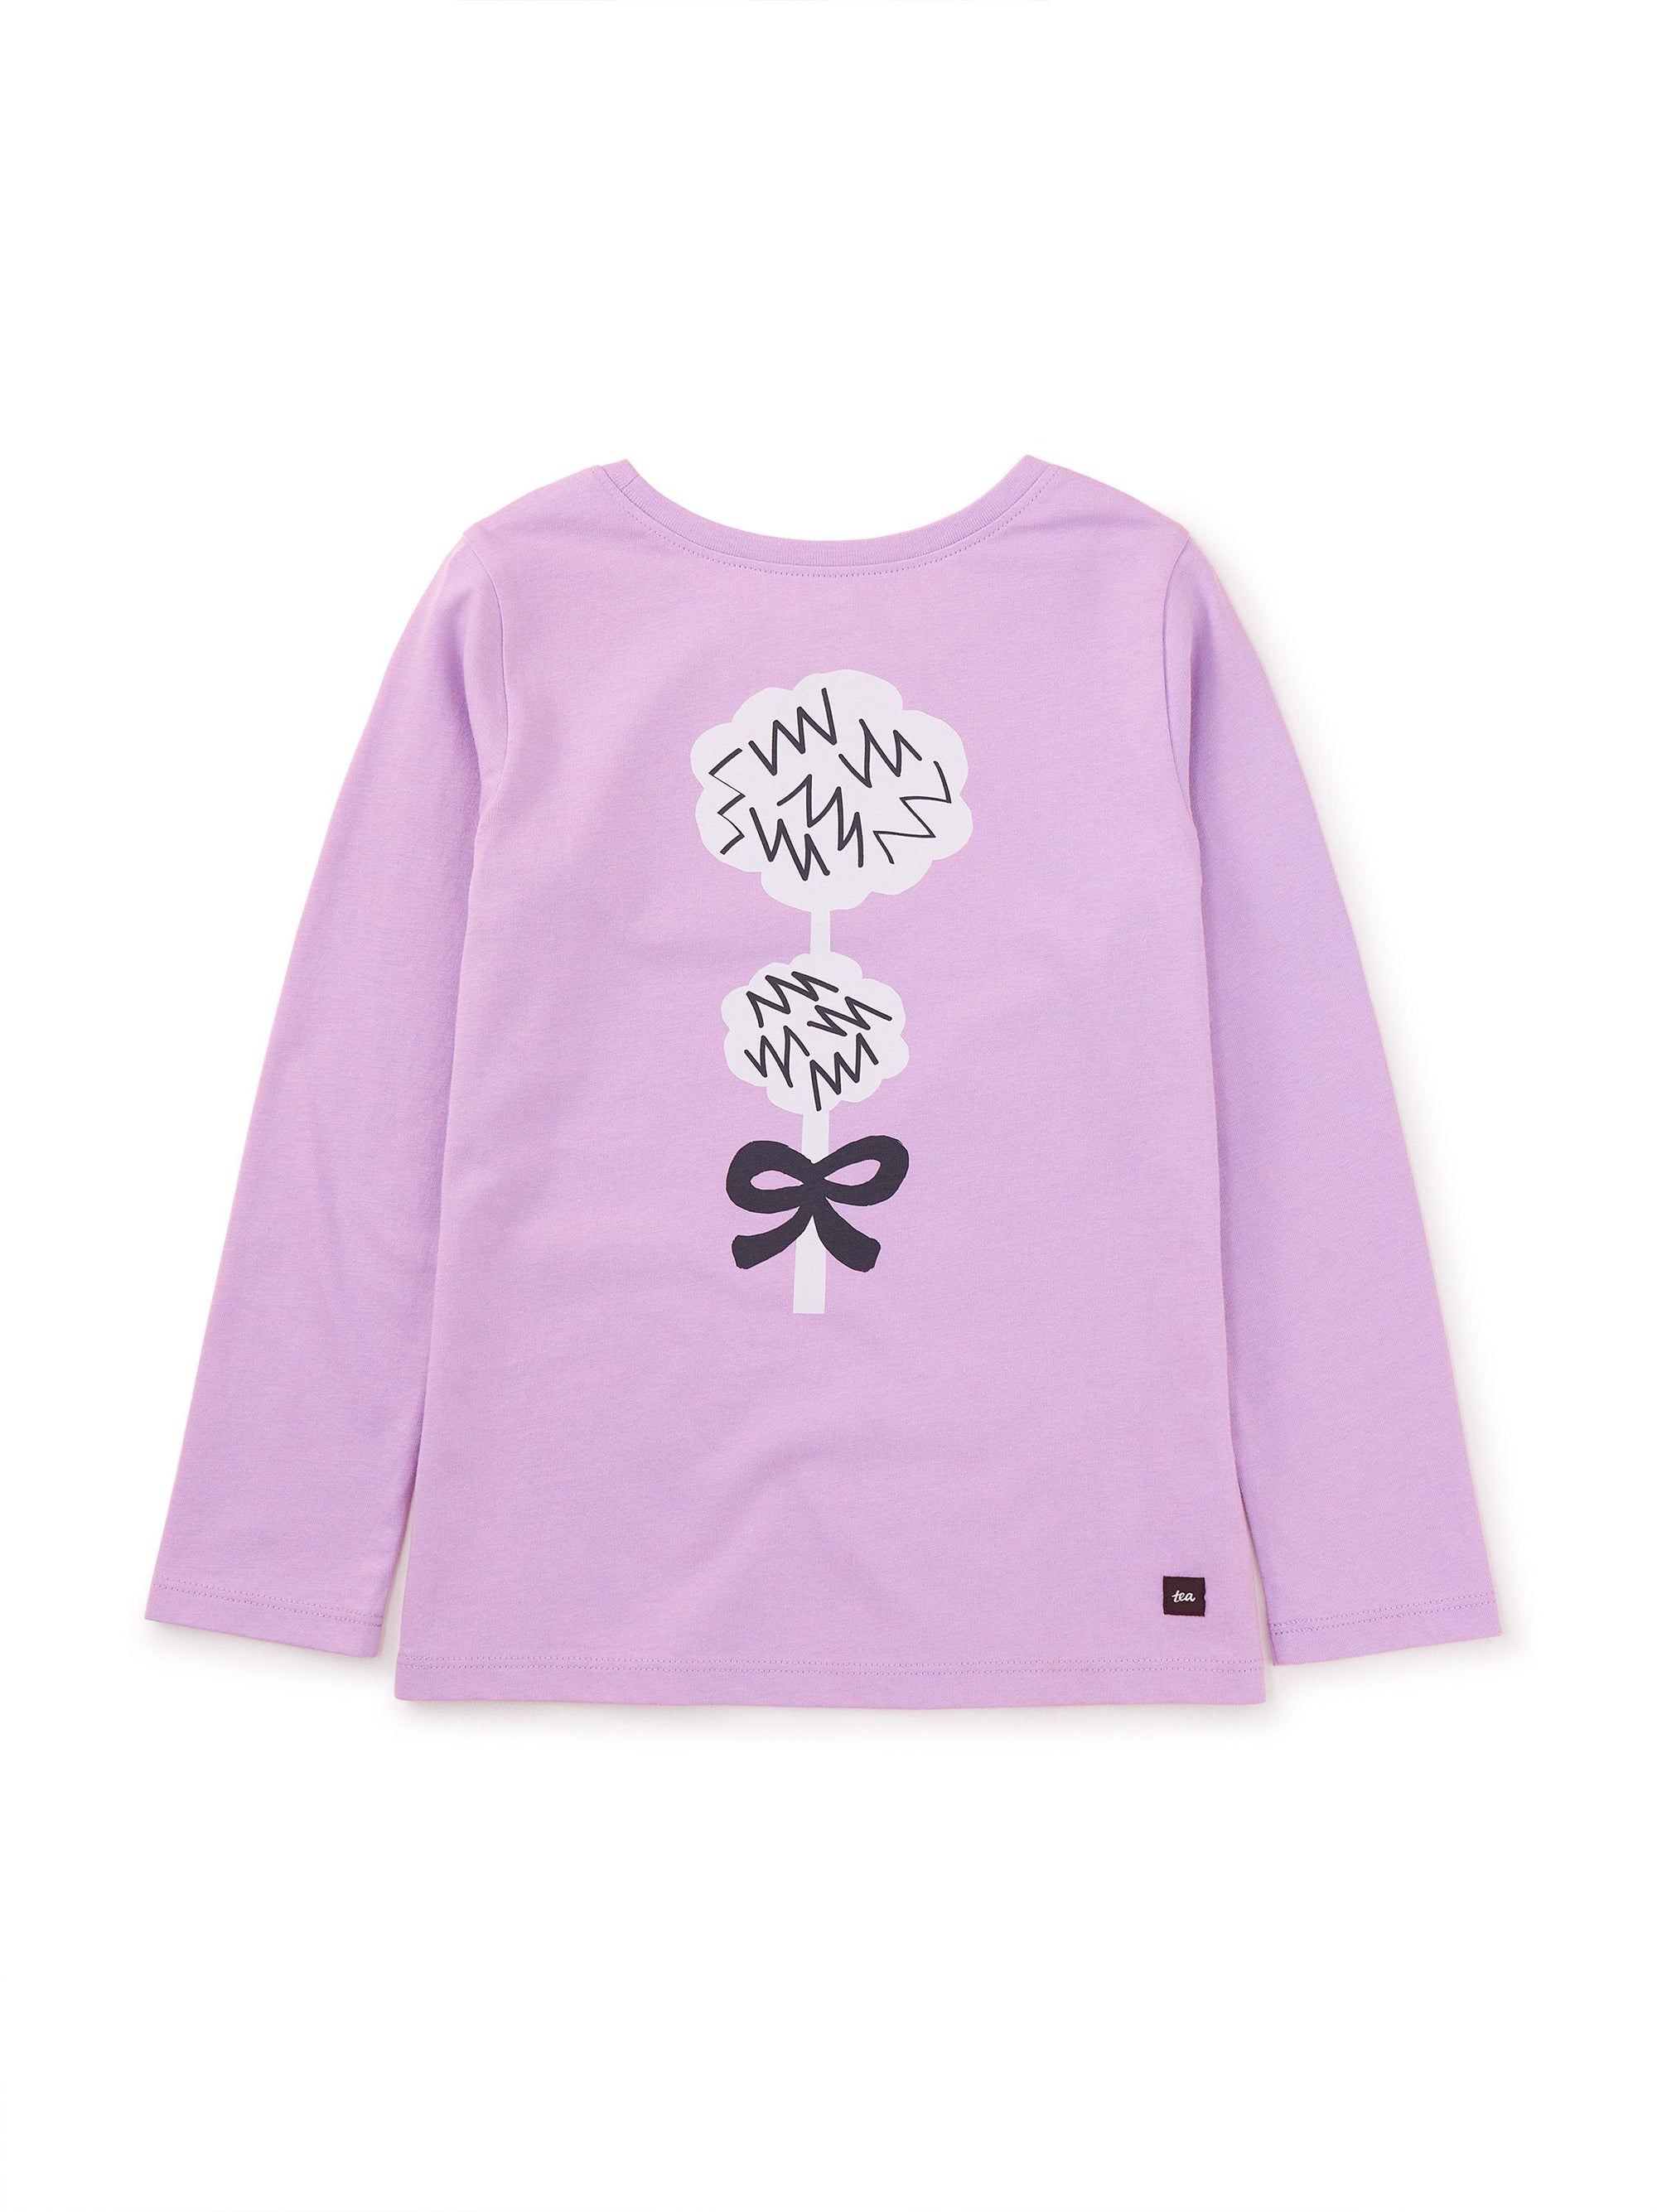 Long Sleeve Baby Tee - Poodle & Bow Lilac